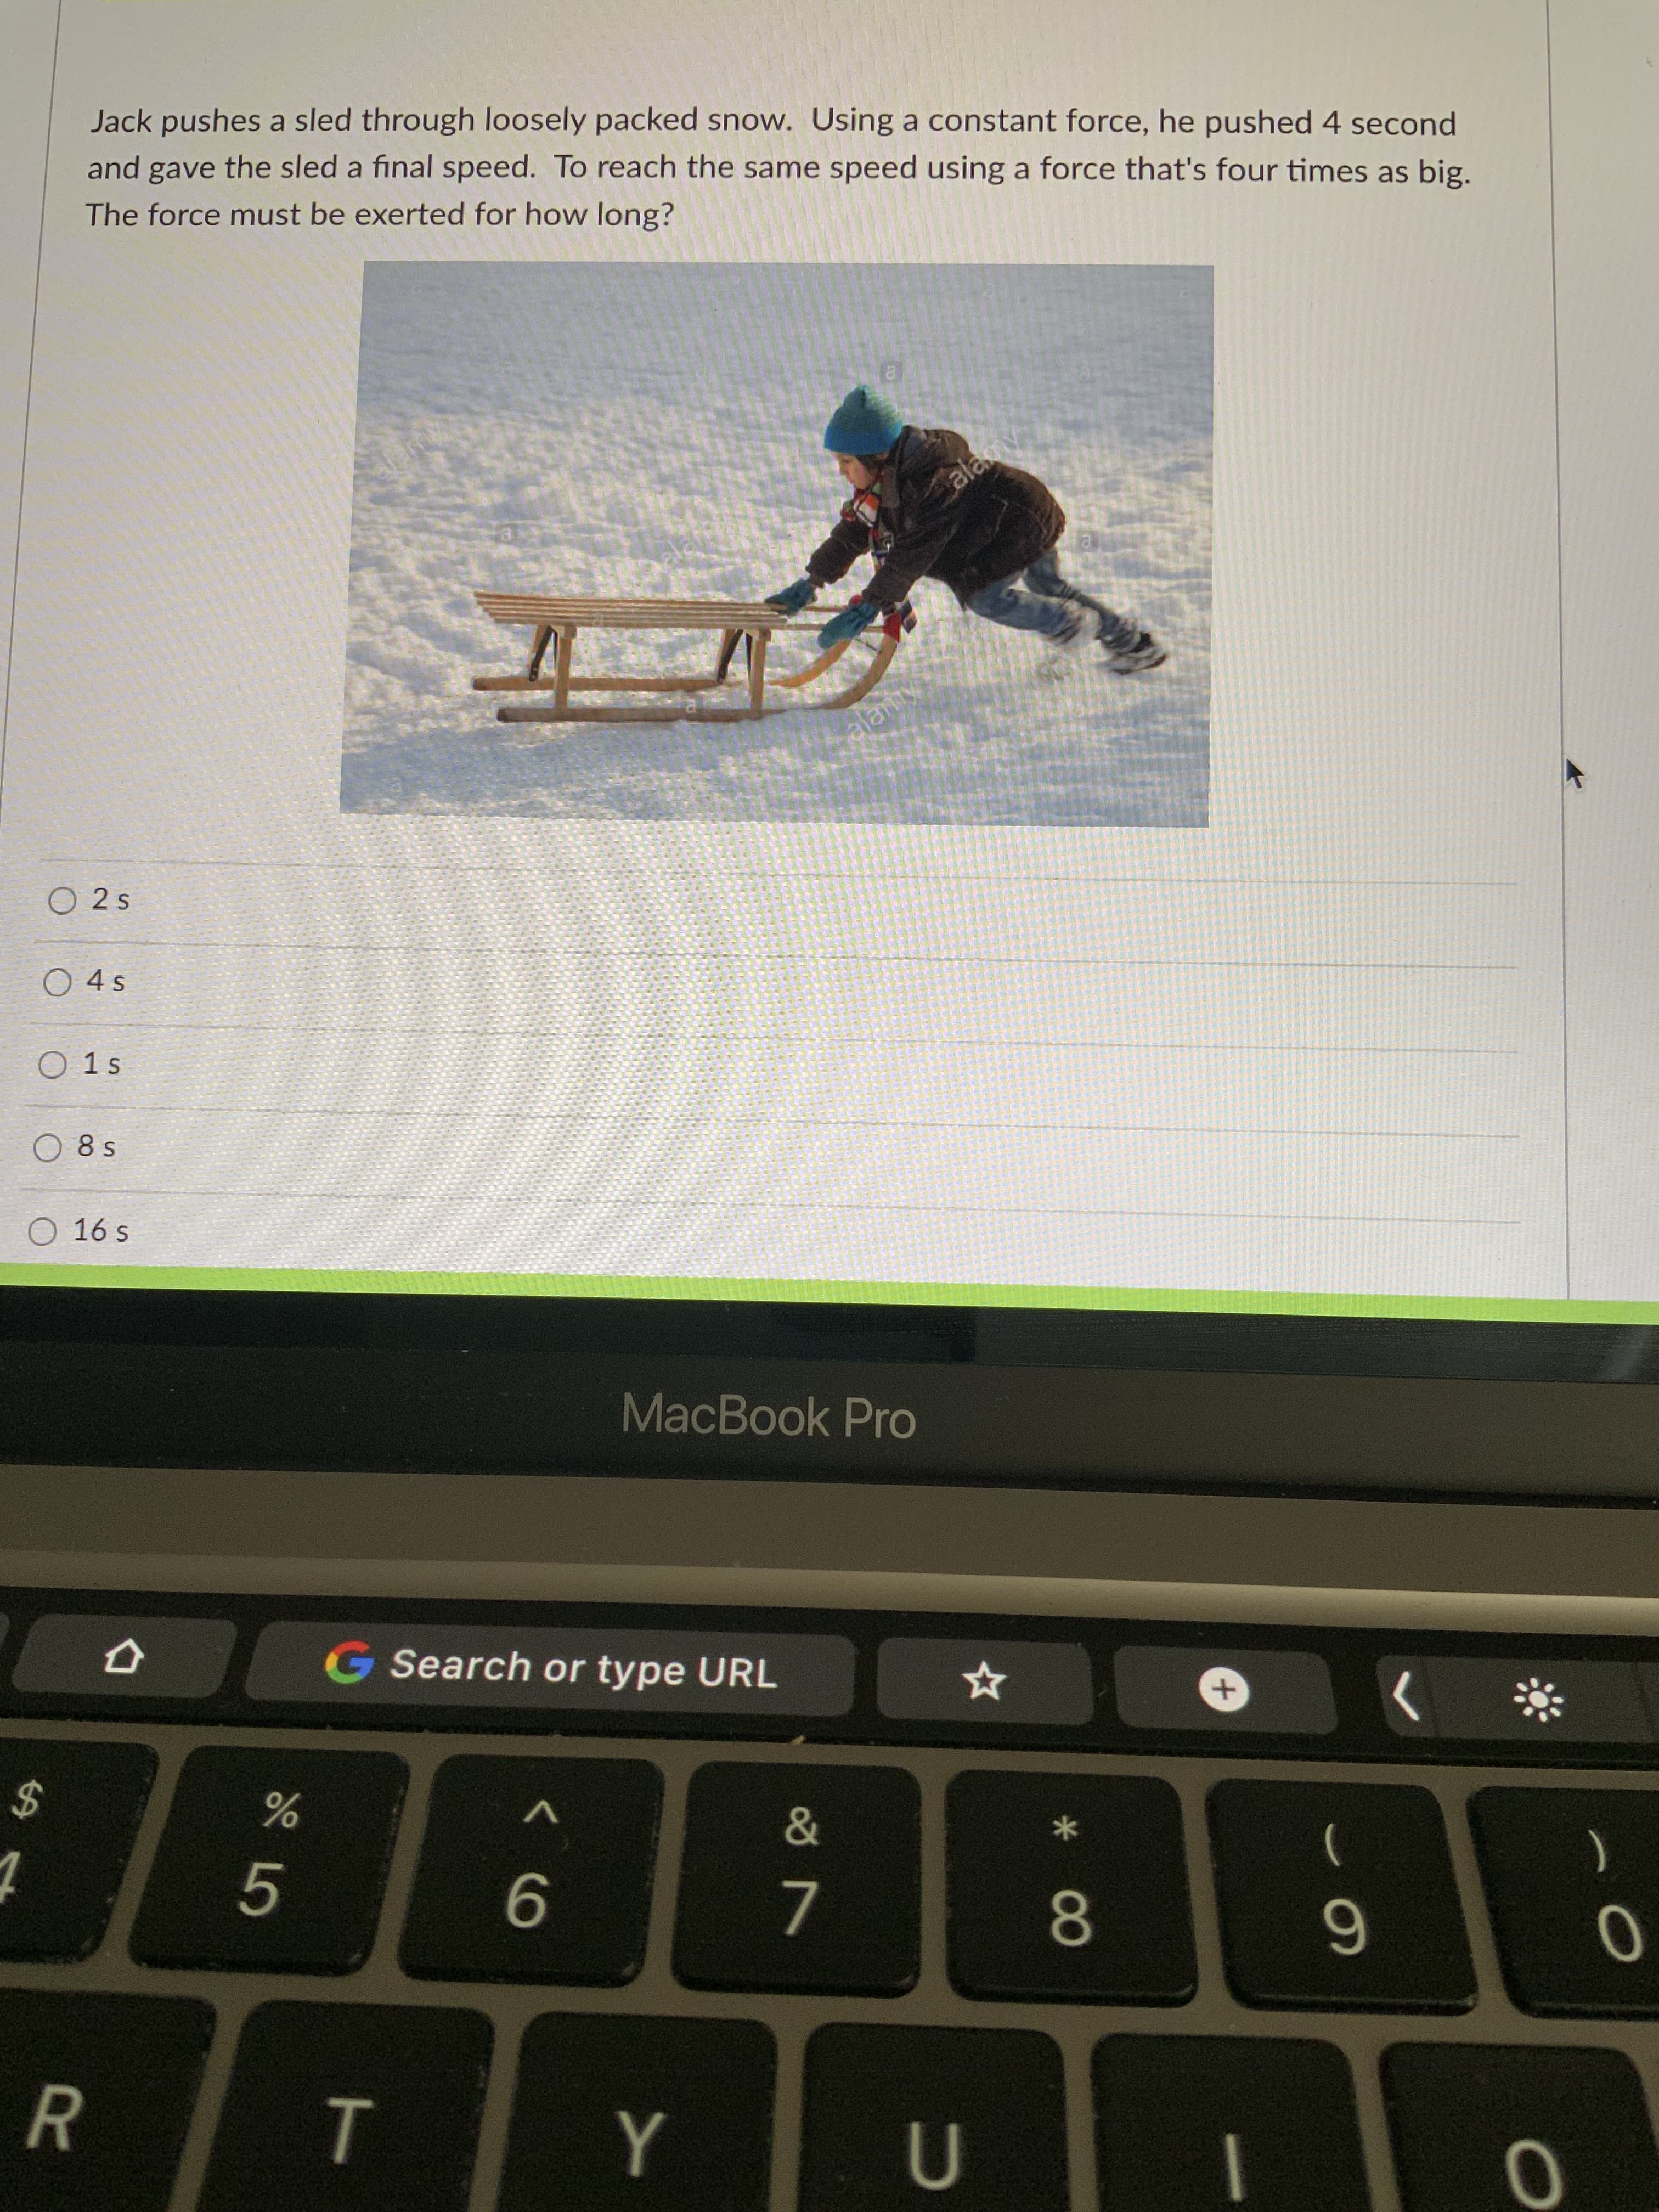 Jack pushes a sled through loosely packed snow. Using a constant force, he pushed 4 second
and gave the sled a final speed. To reach the same speed using a force that's four times as big.
The force must be exerted for how long?
alamy
alamy
O 2s
O 4s
O 1s
O 8 s
O 16 s
MacBook Pro
G Search or type URL
24
5.
)
6
